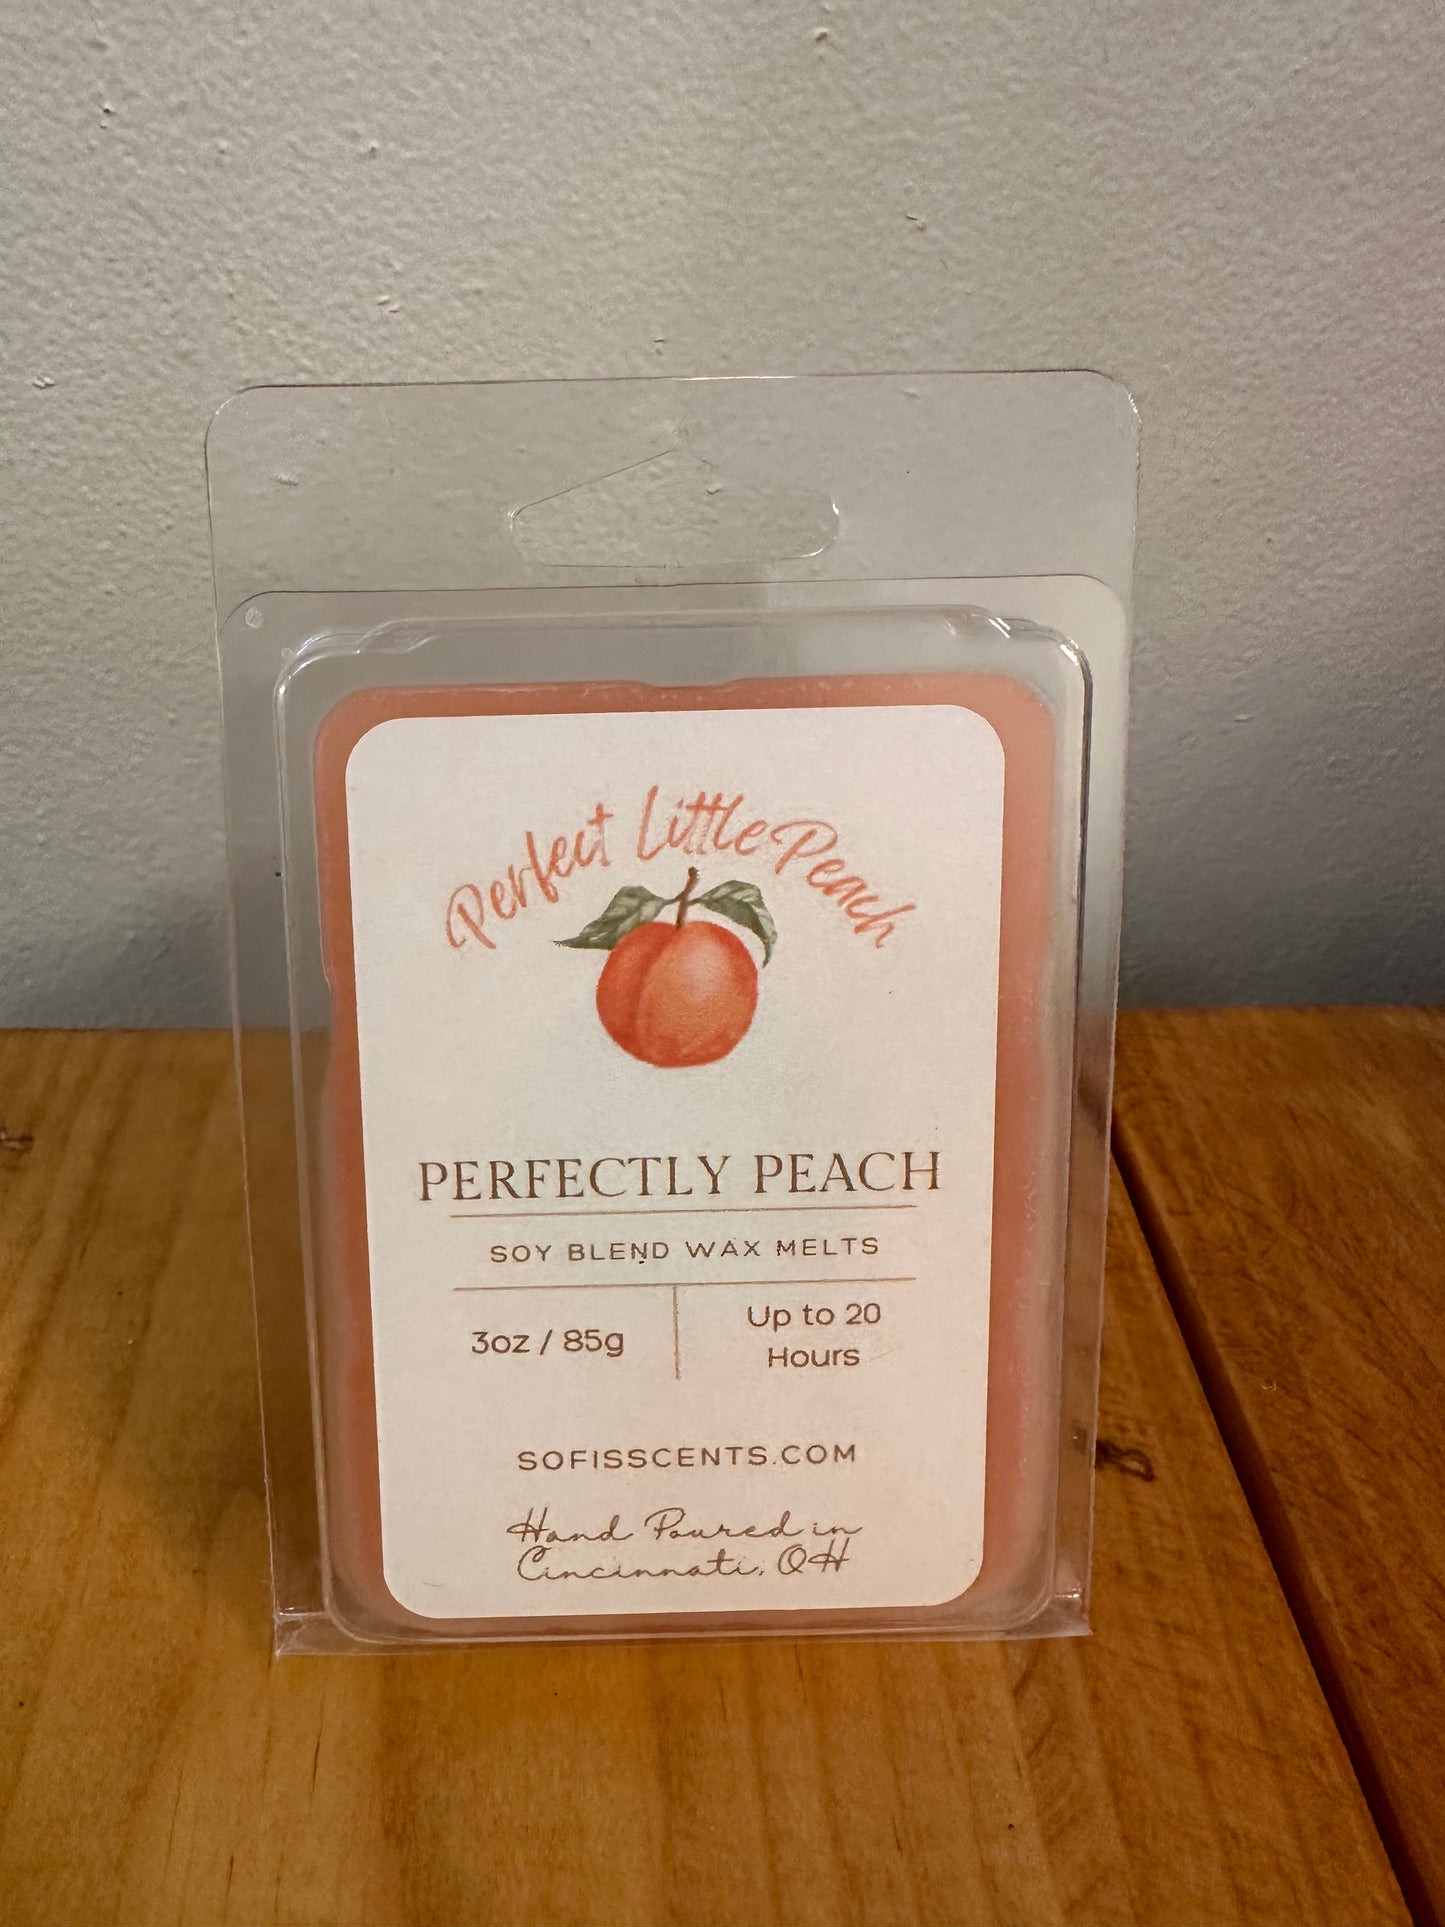 Perfectly Peach Soy Blend Wax Melts